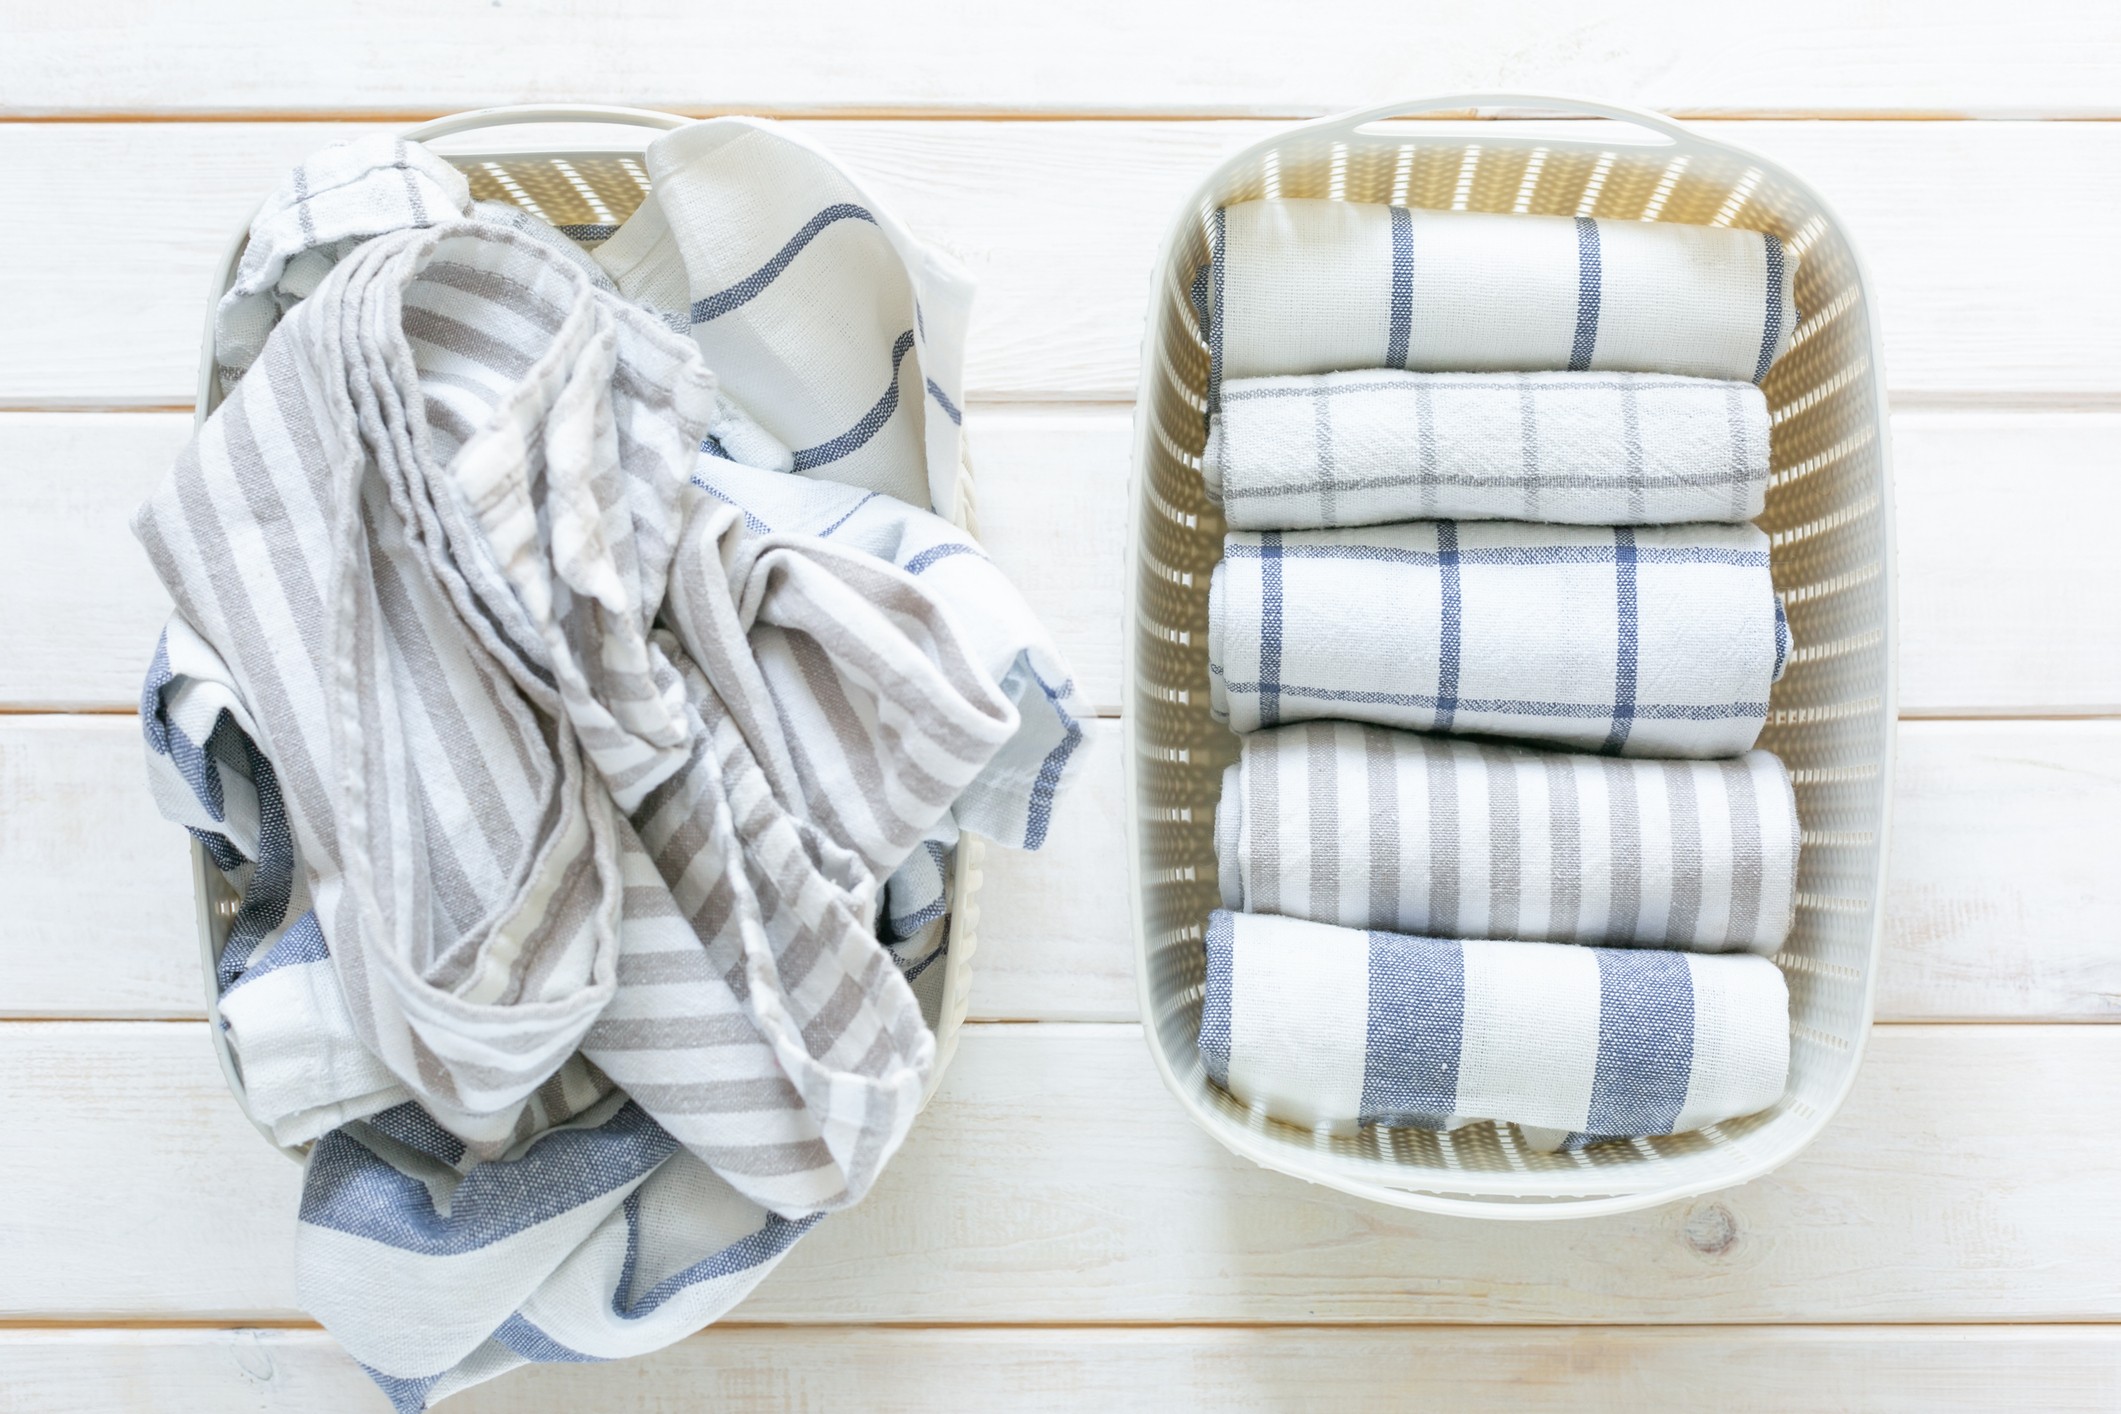 Marie Kondo tidying concept - folded kitchen linens in white basket, top view (Foto: Getty Images/iStockphoto)